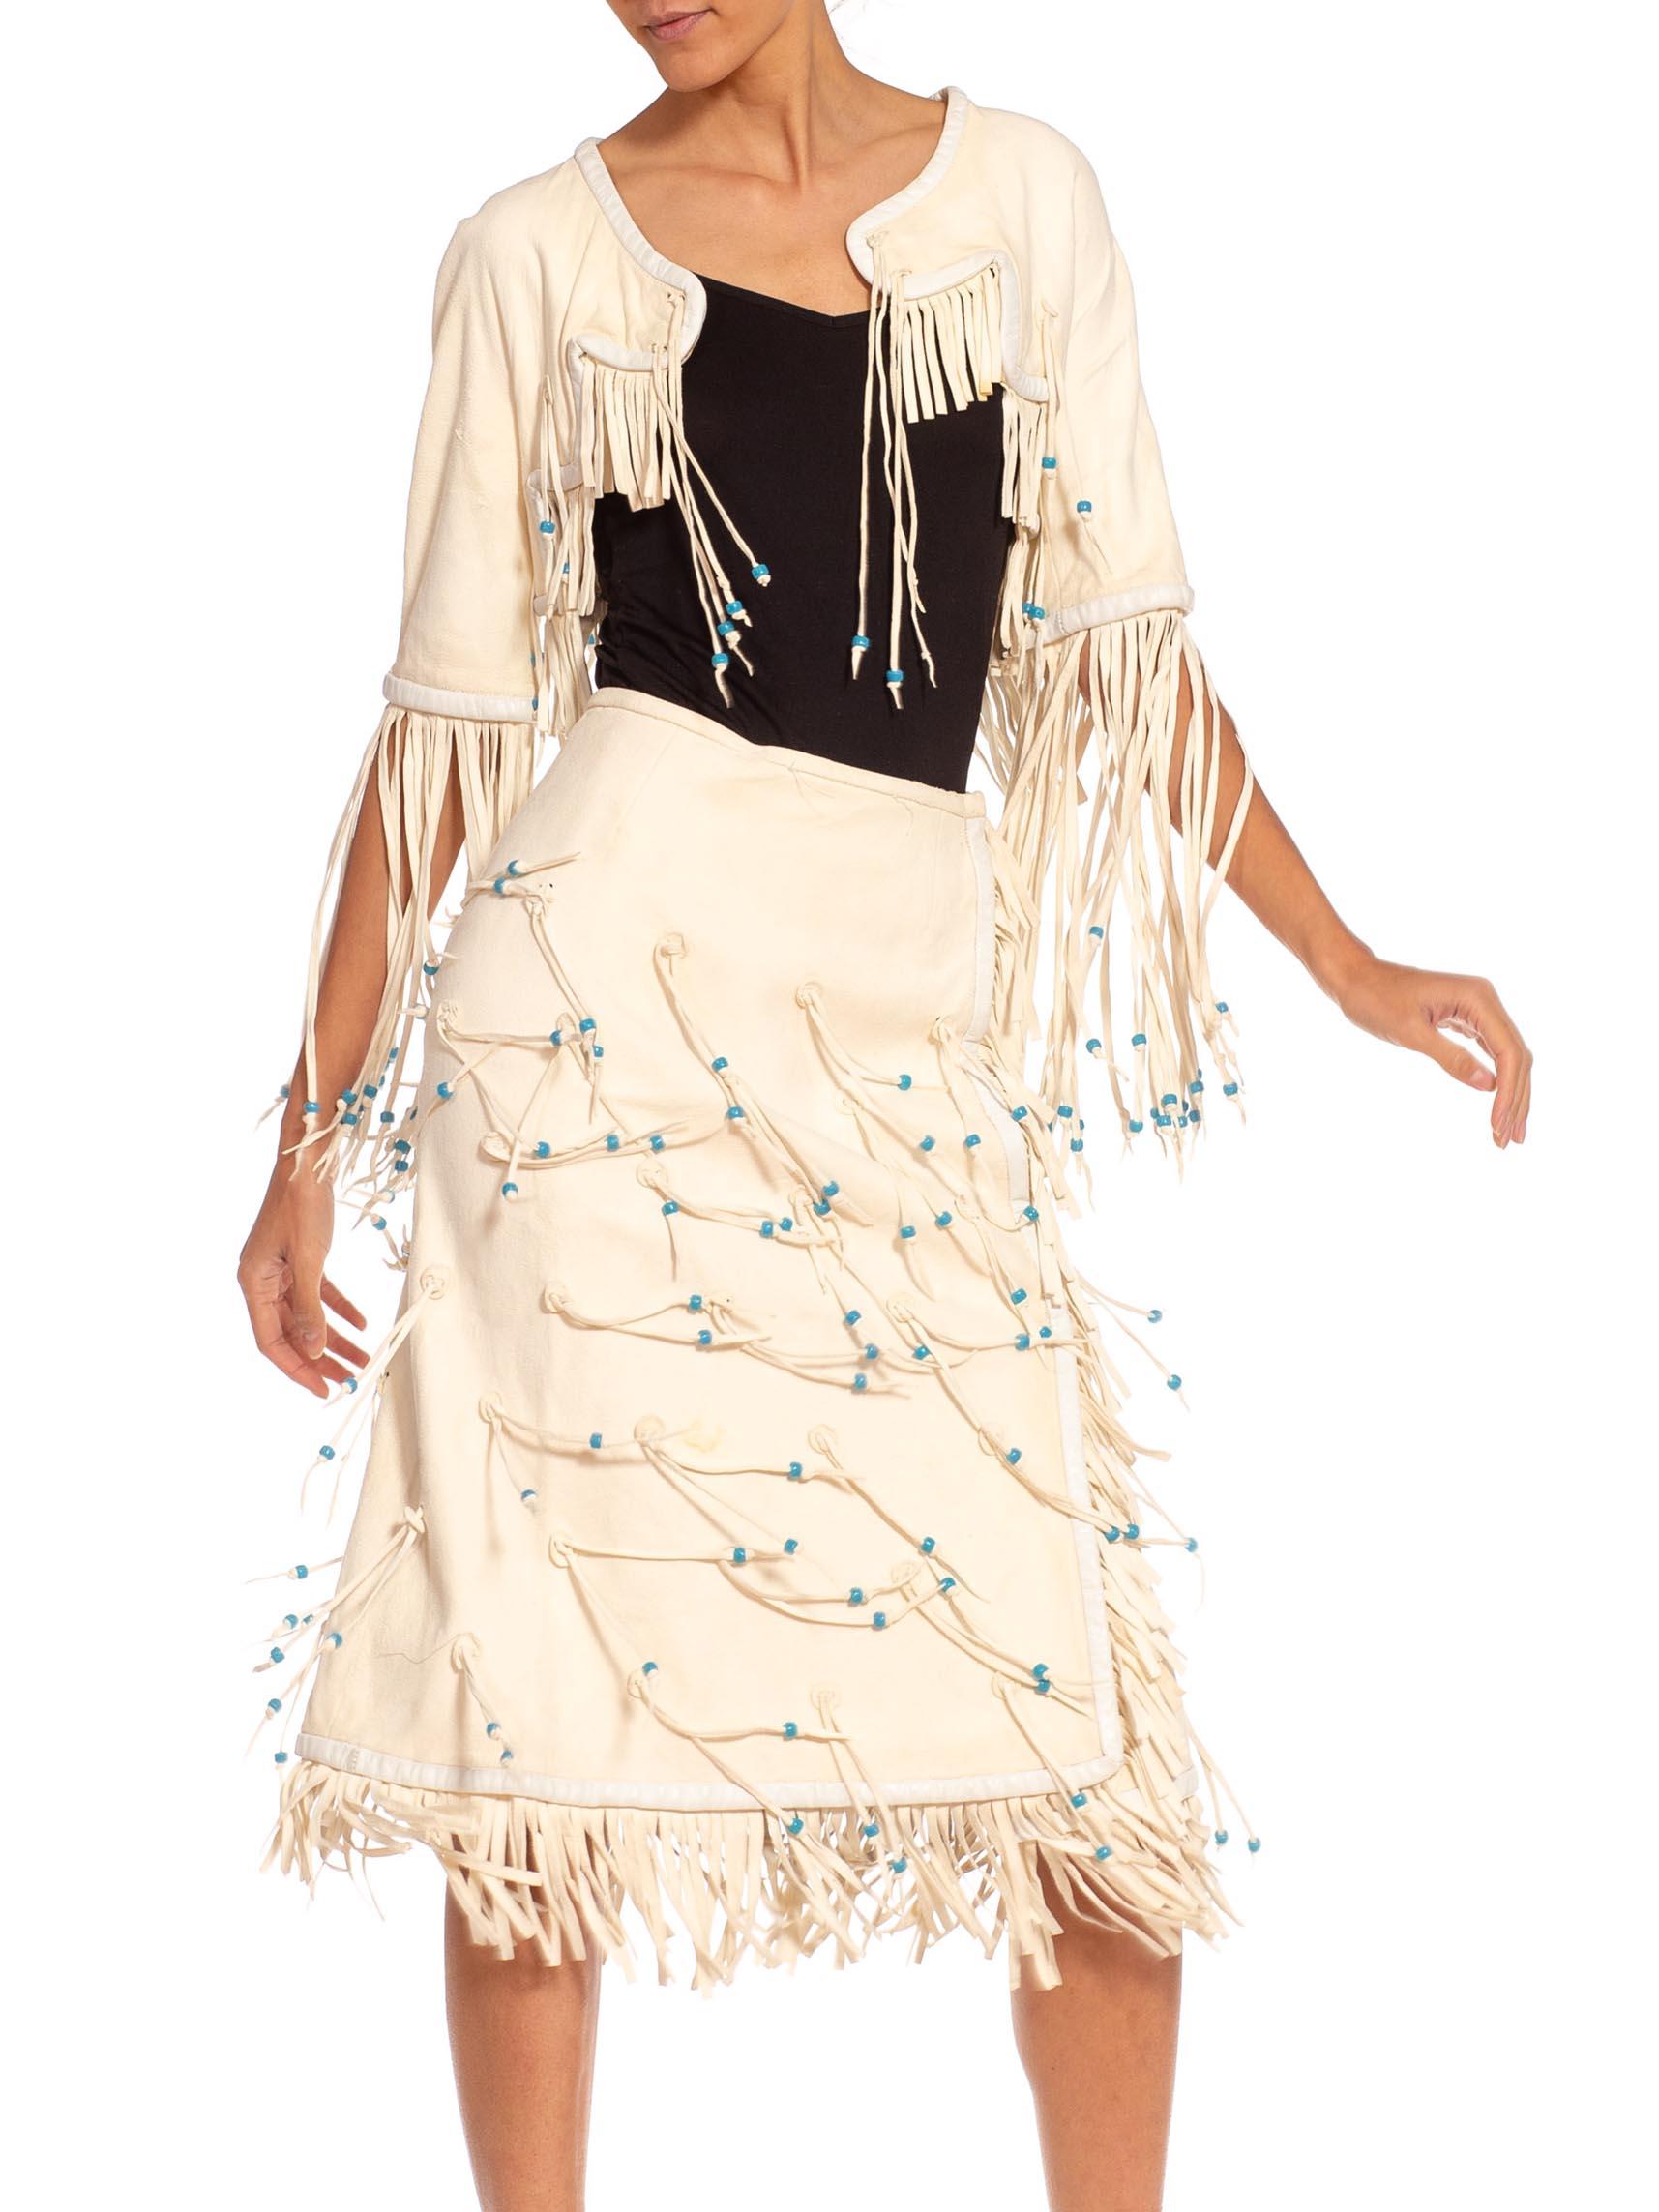 1970S GEORGIO SANT'angelo White & Blue Leather Suede Beaded Fringe Jacket Skirt For Sale 3